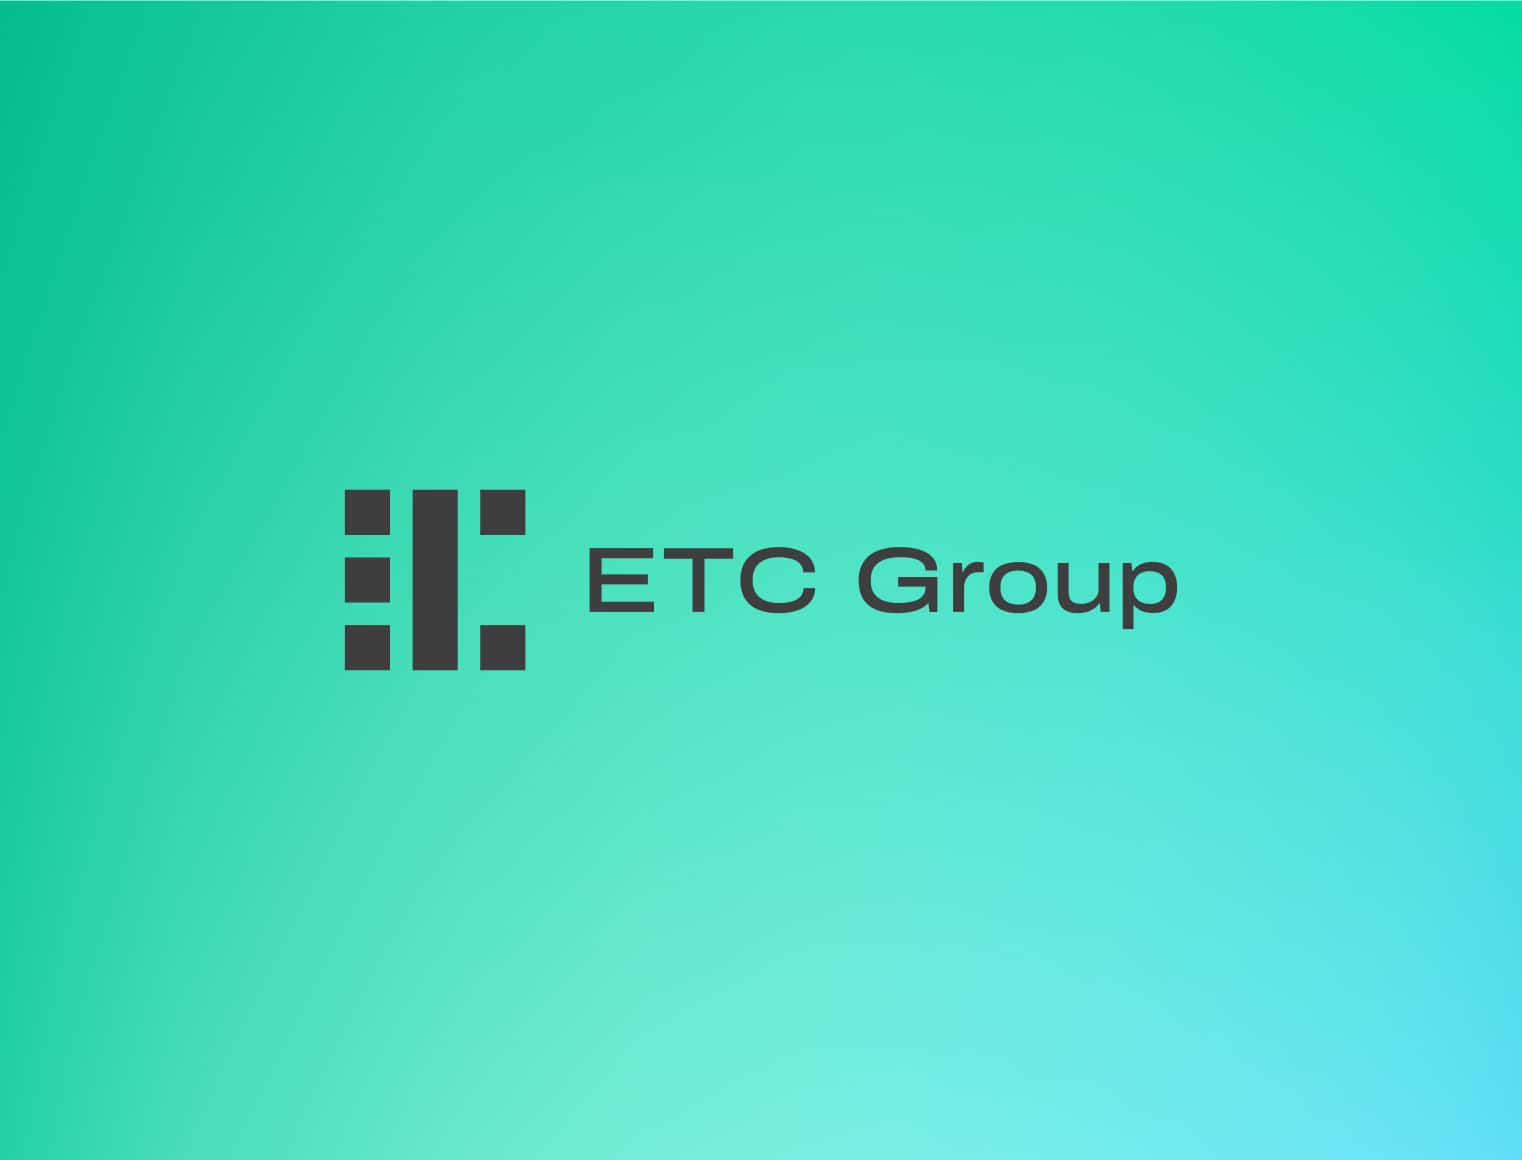 Crypto ETC investment products of the ETC Group are now tax-free after a one-year holding period in Germany